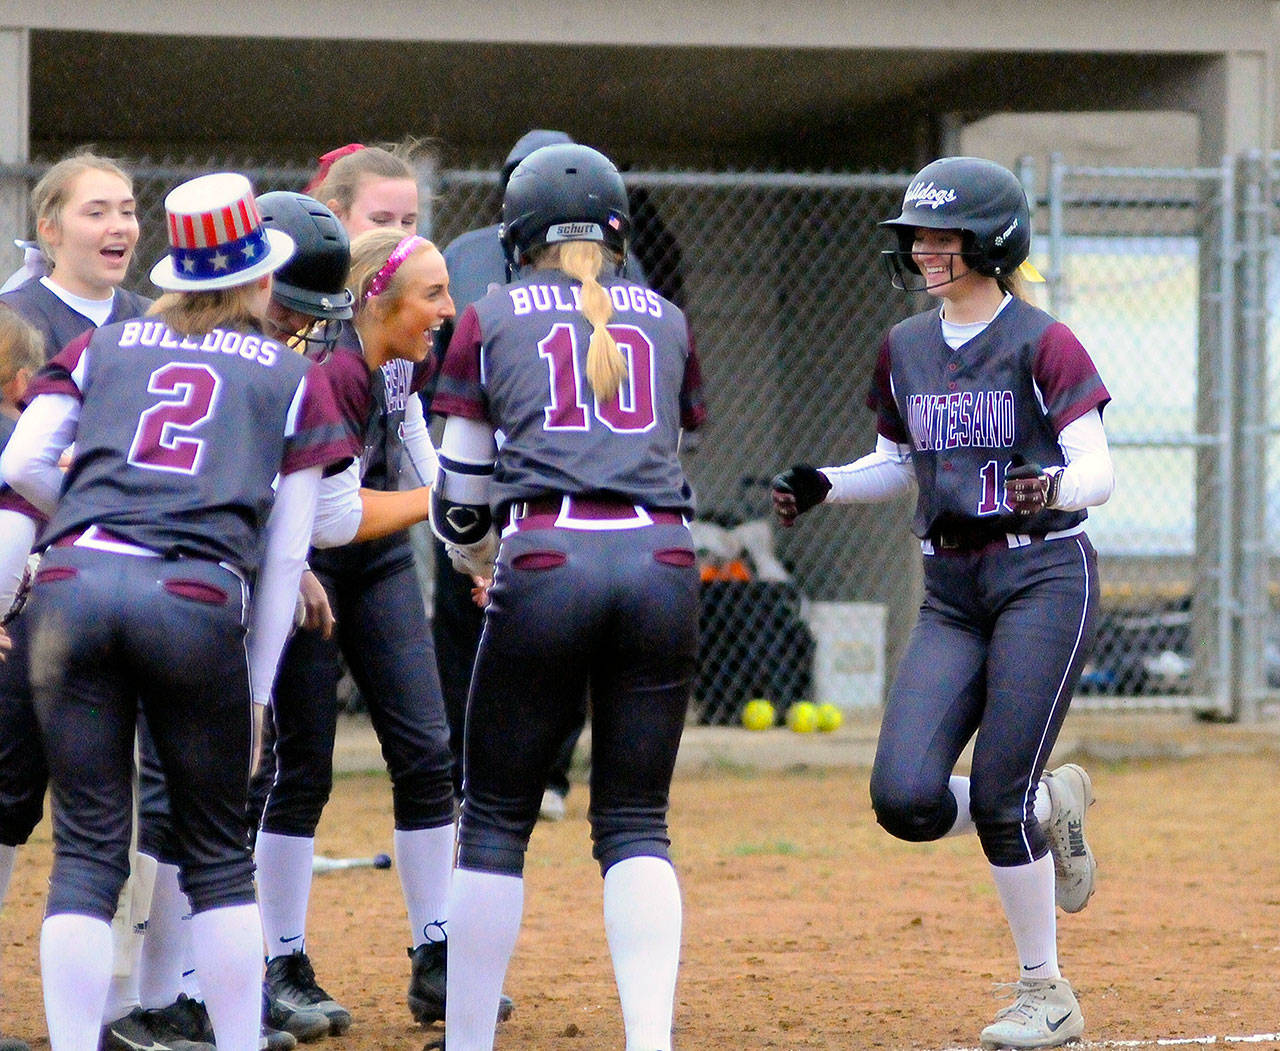 Tuesday Prep Roundup: Campbell’s blast leads Montesano to win over Lakeside